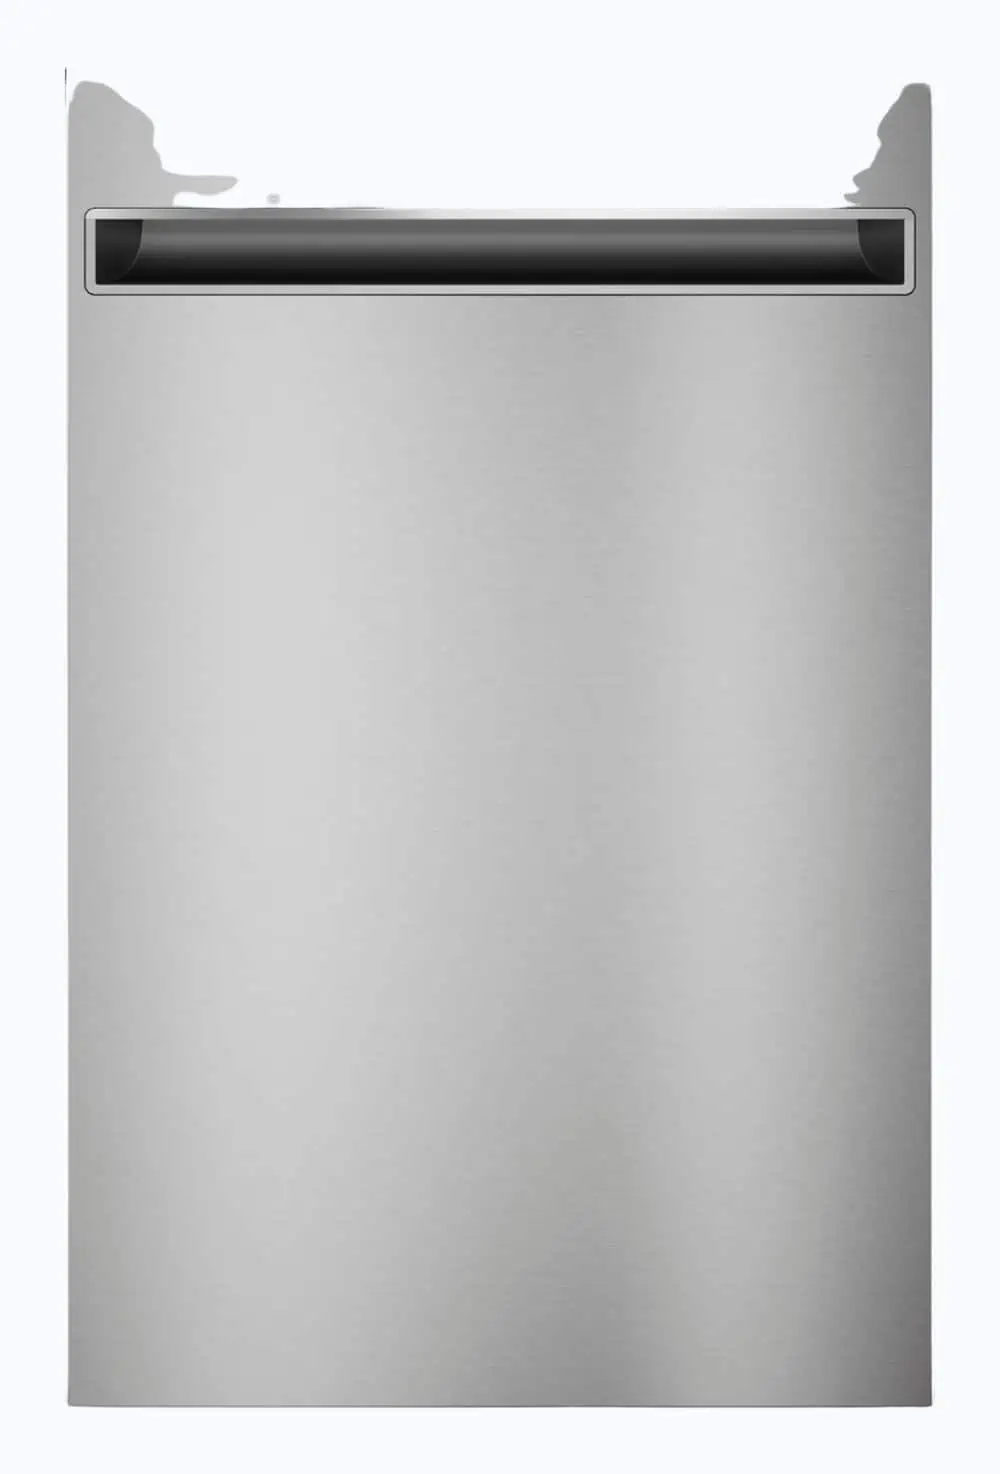 Product Image of the Haier Top Control Built-In Dishwasher